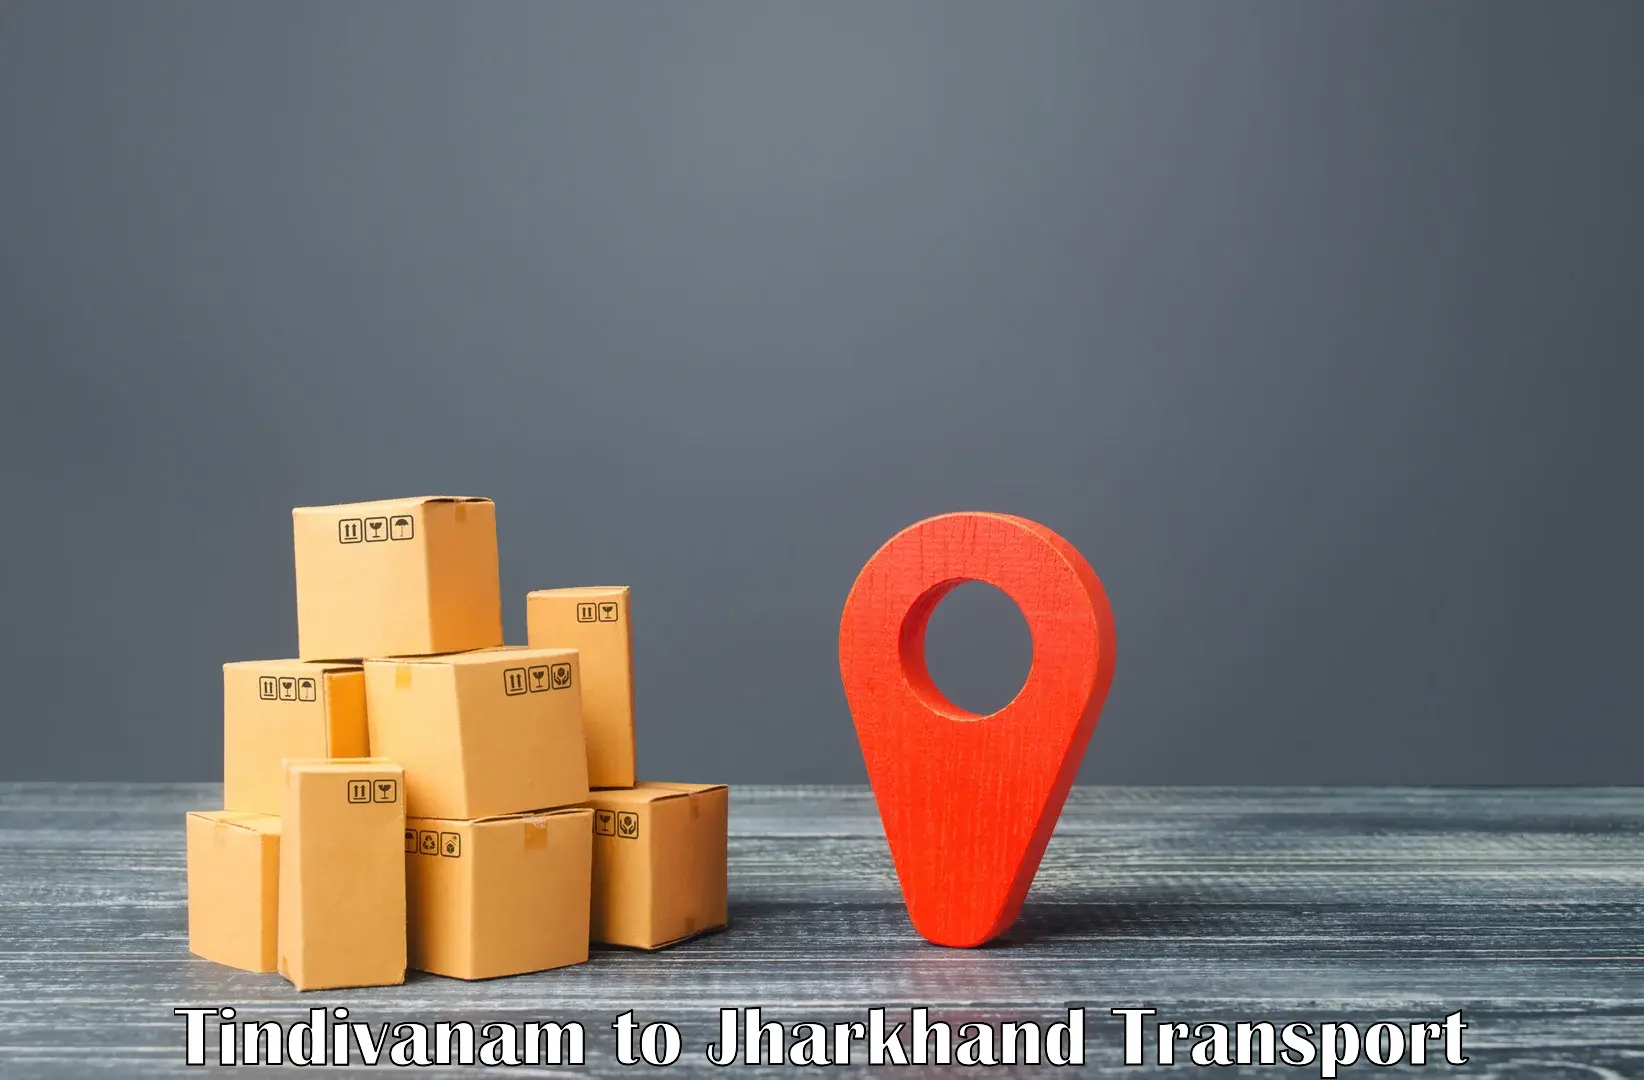 Online transport in Tindivanam to Chatra